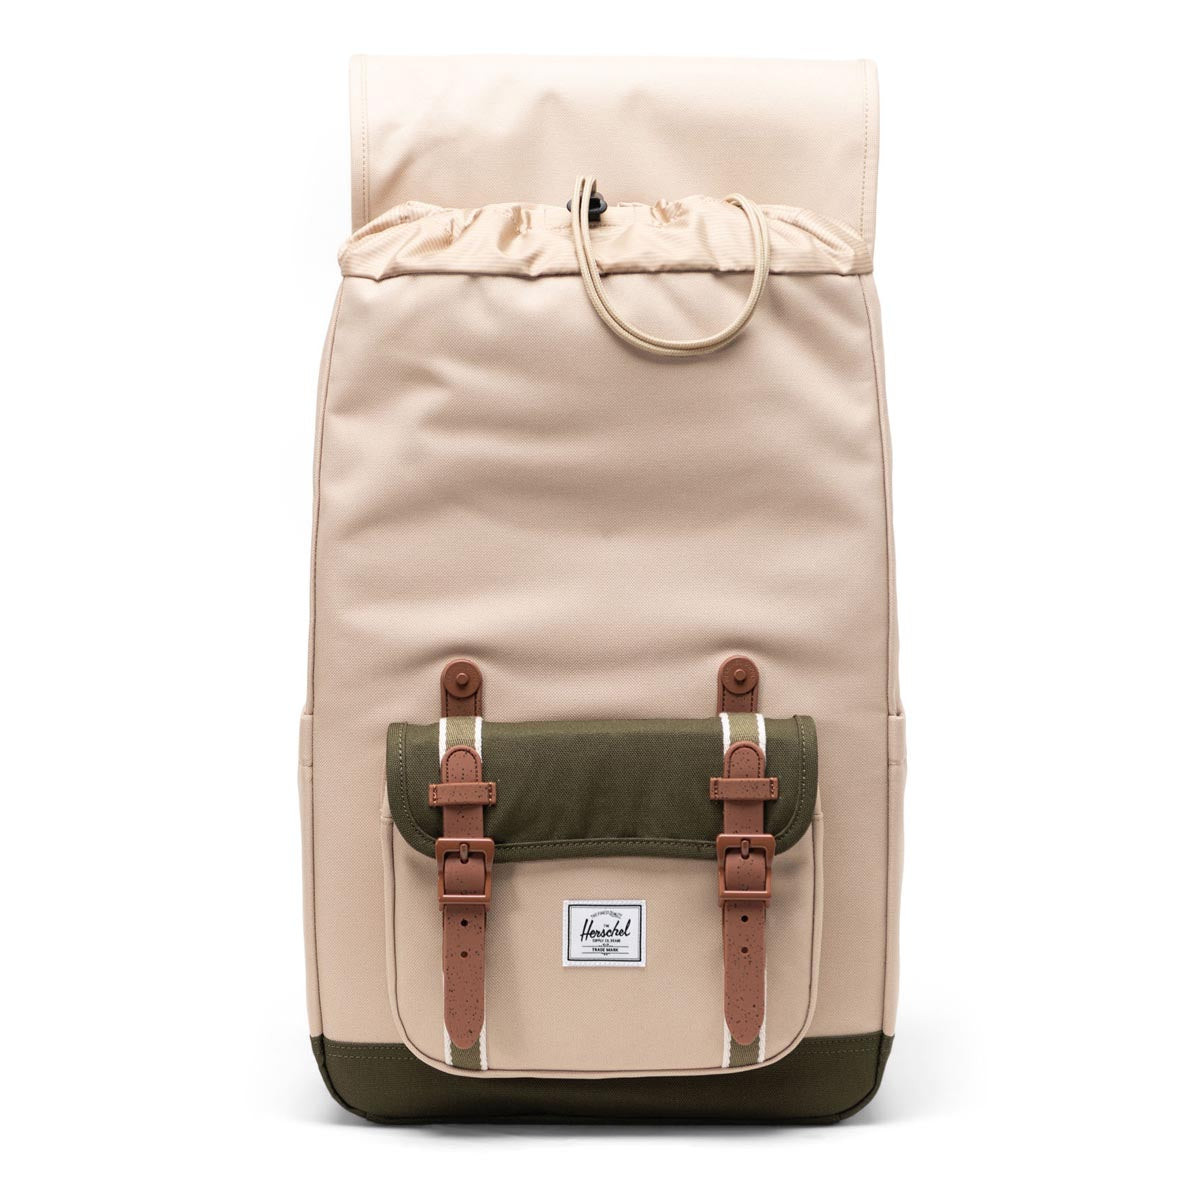 Herschel Supply Little America Mid Backpack - Twill/Ivy Green image 2